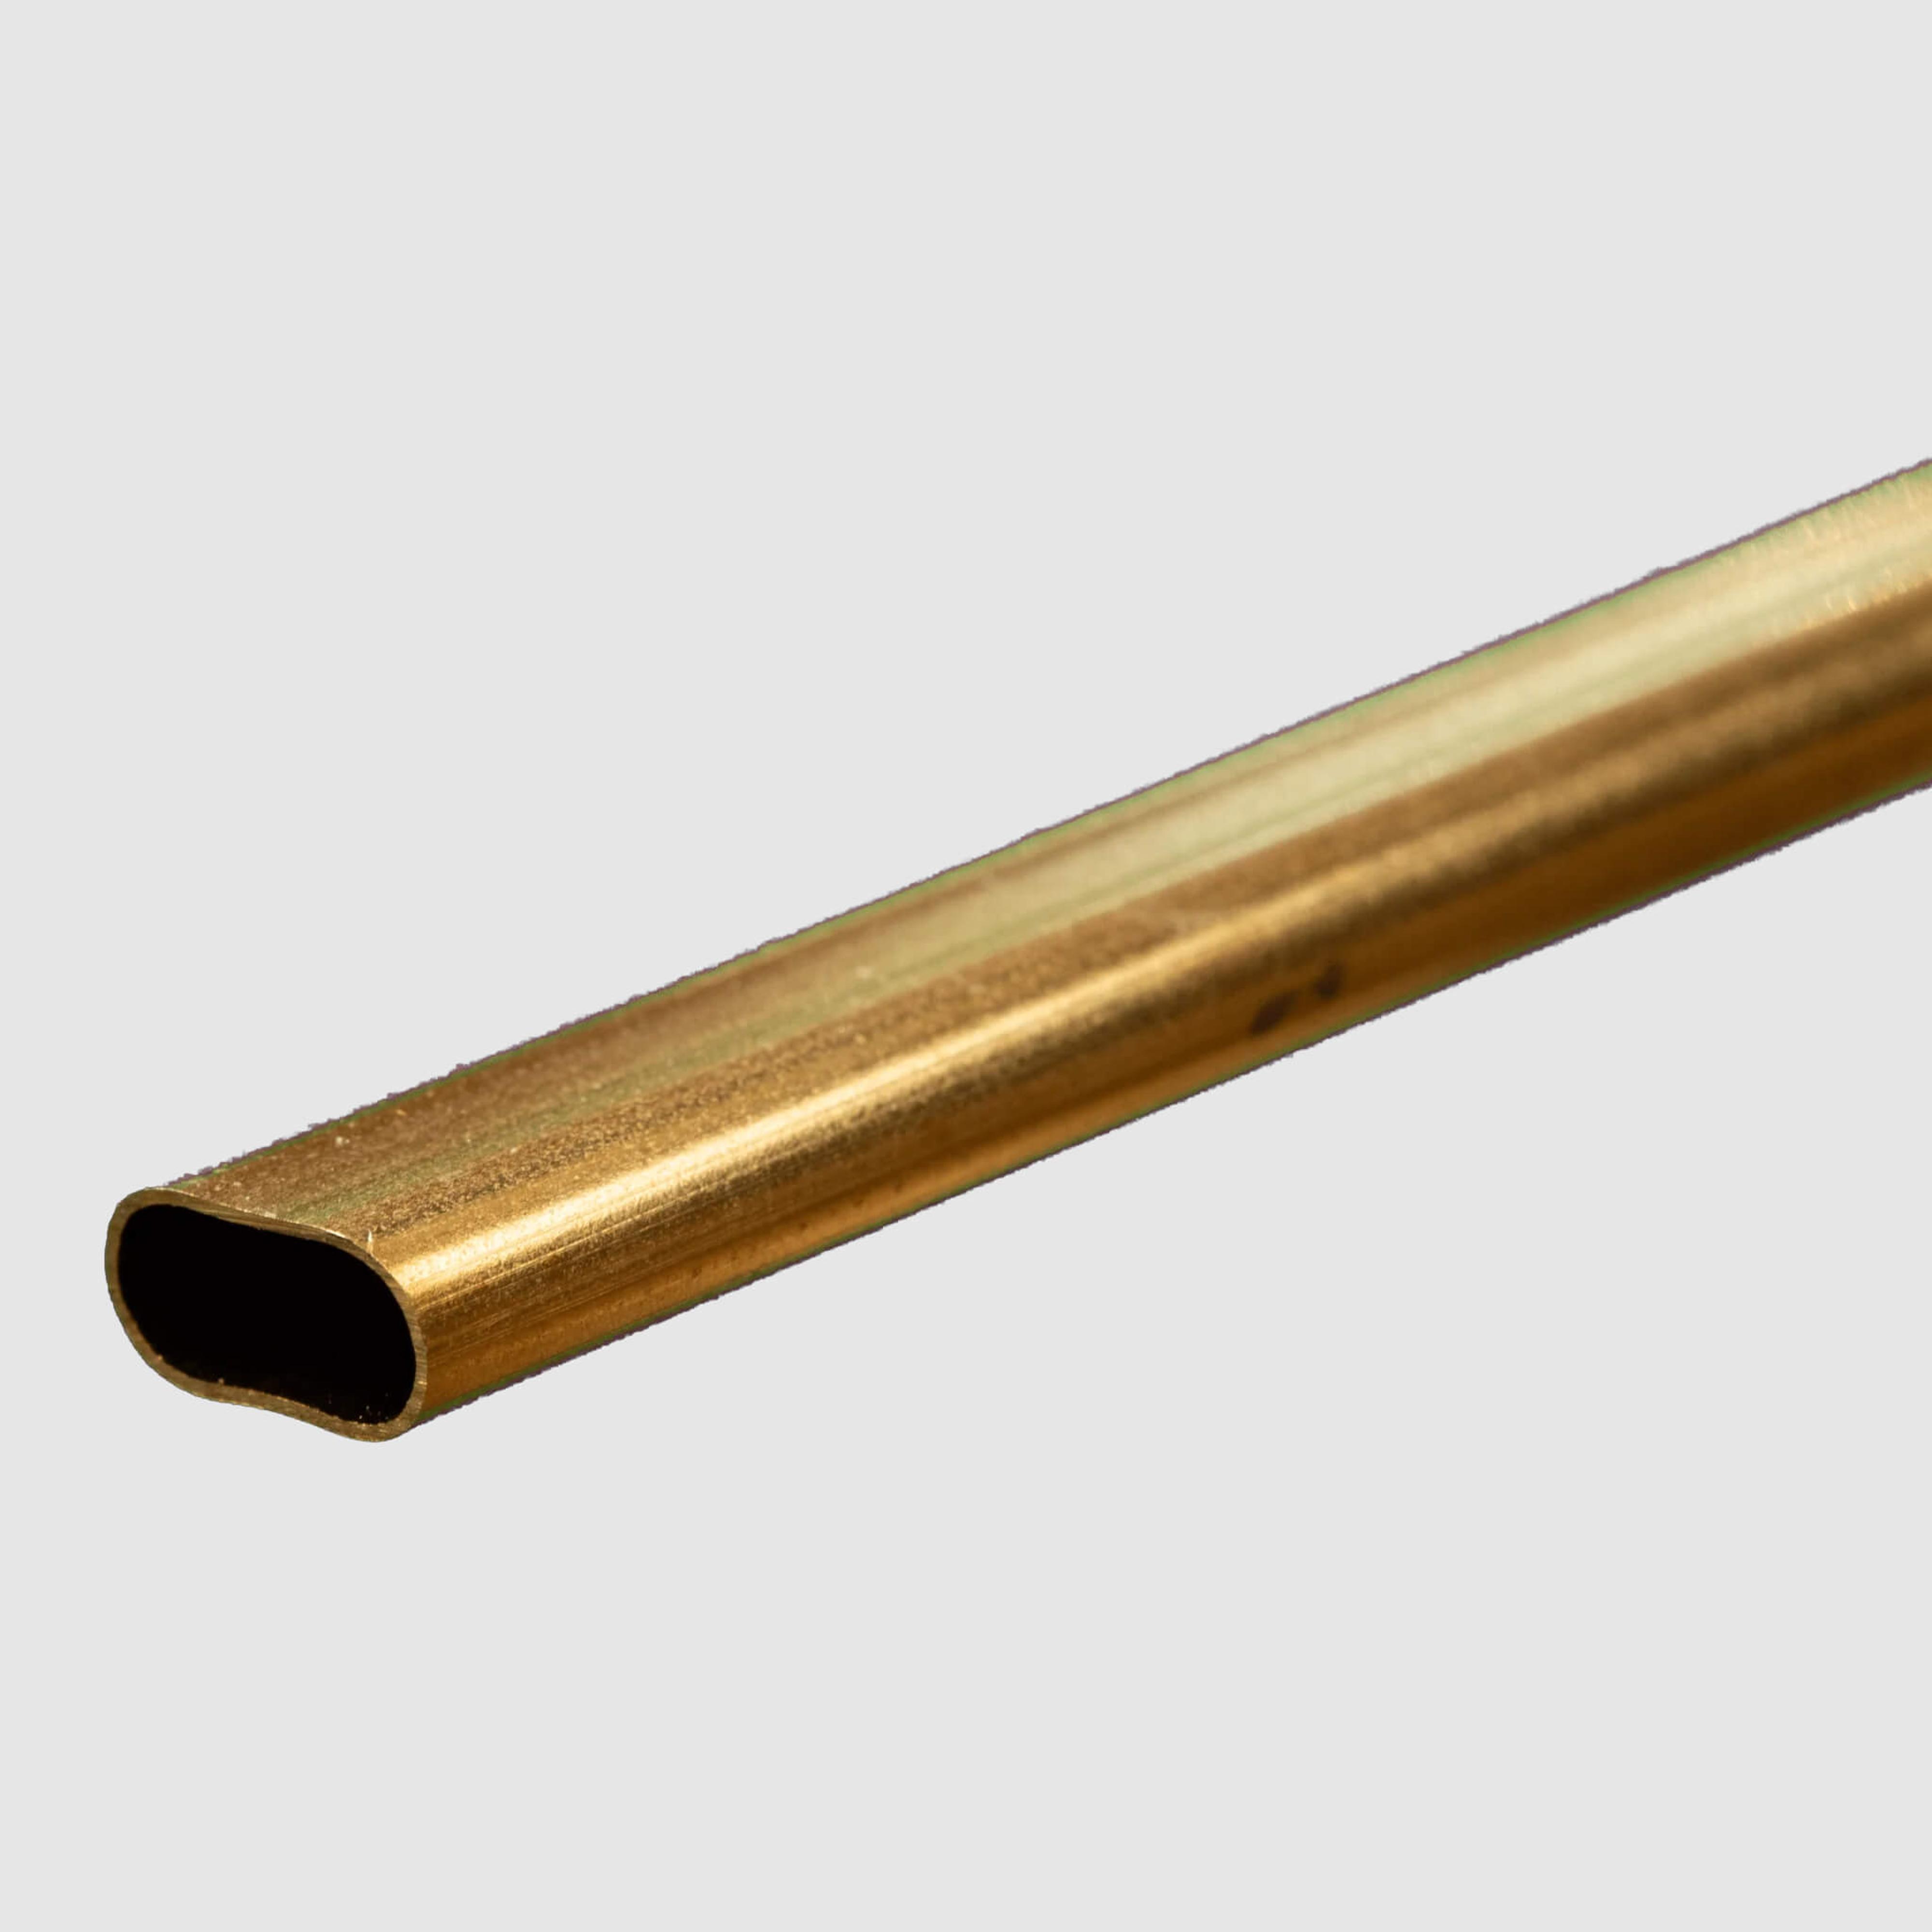 Oval Brass Tube (Large, 12in L)(1 pc)